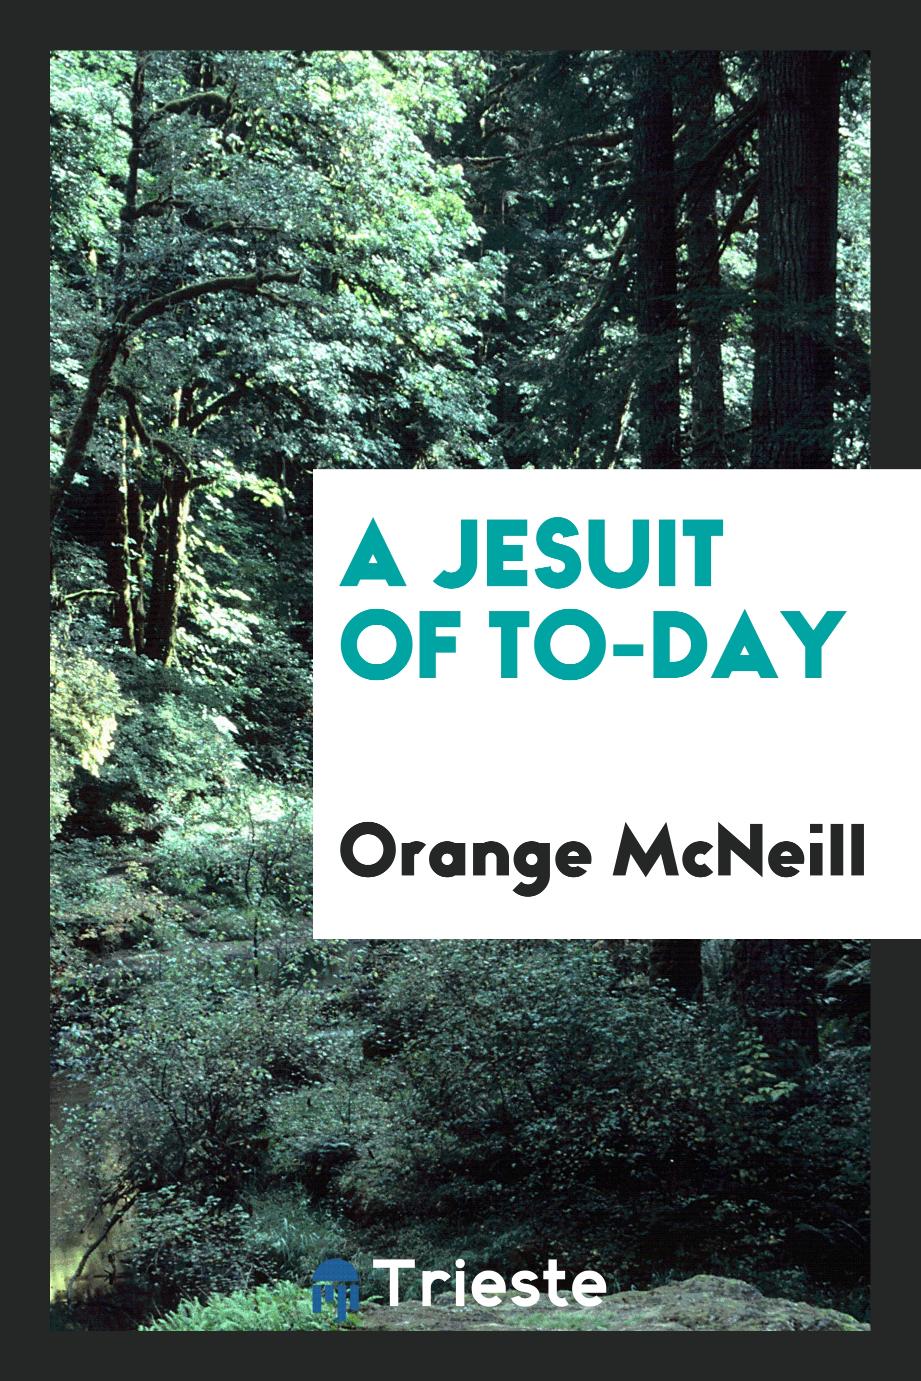 A Jesuit of To-Day